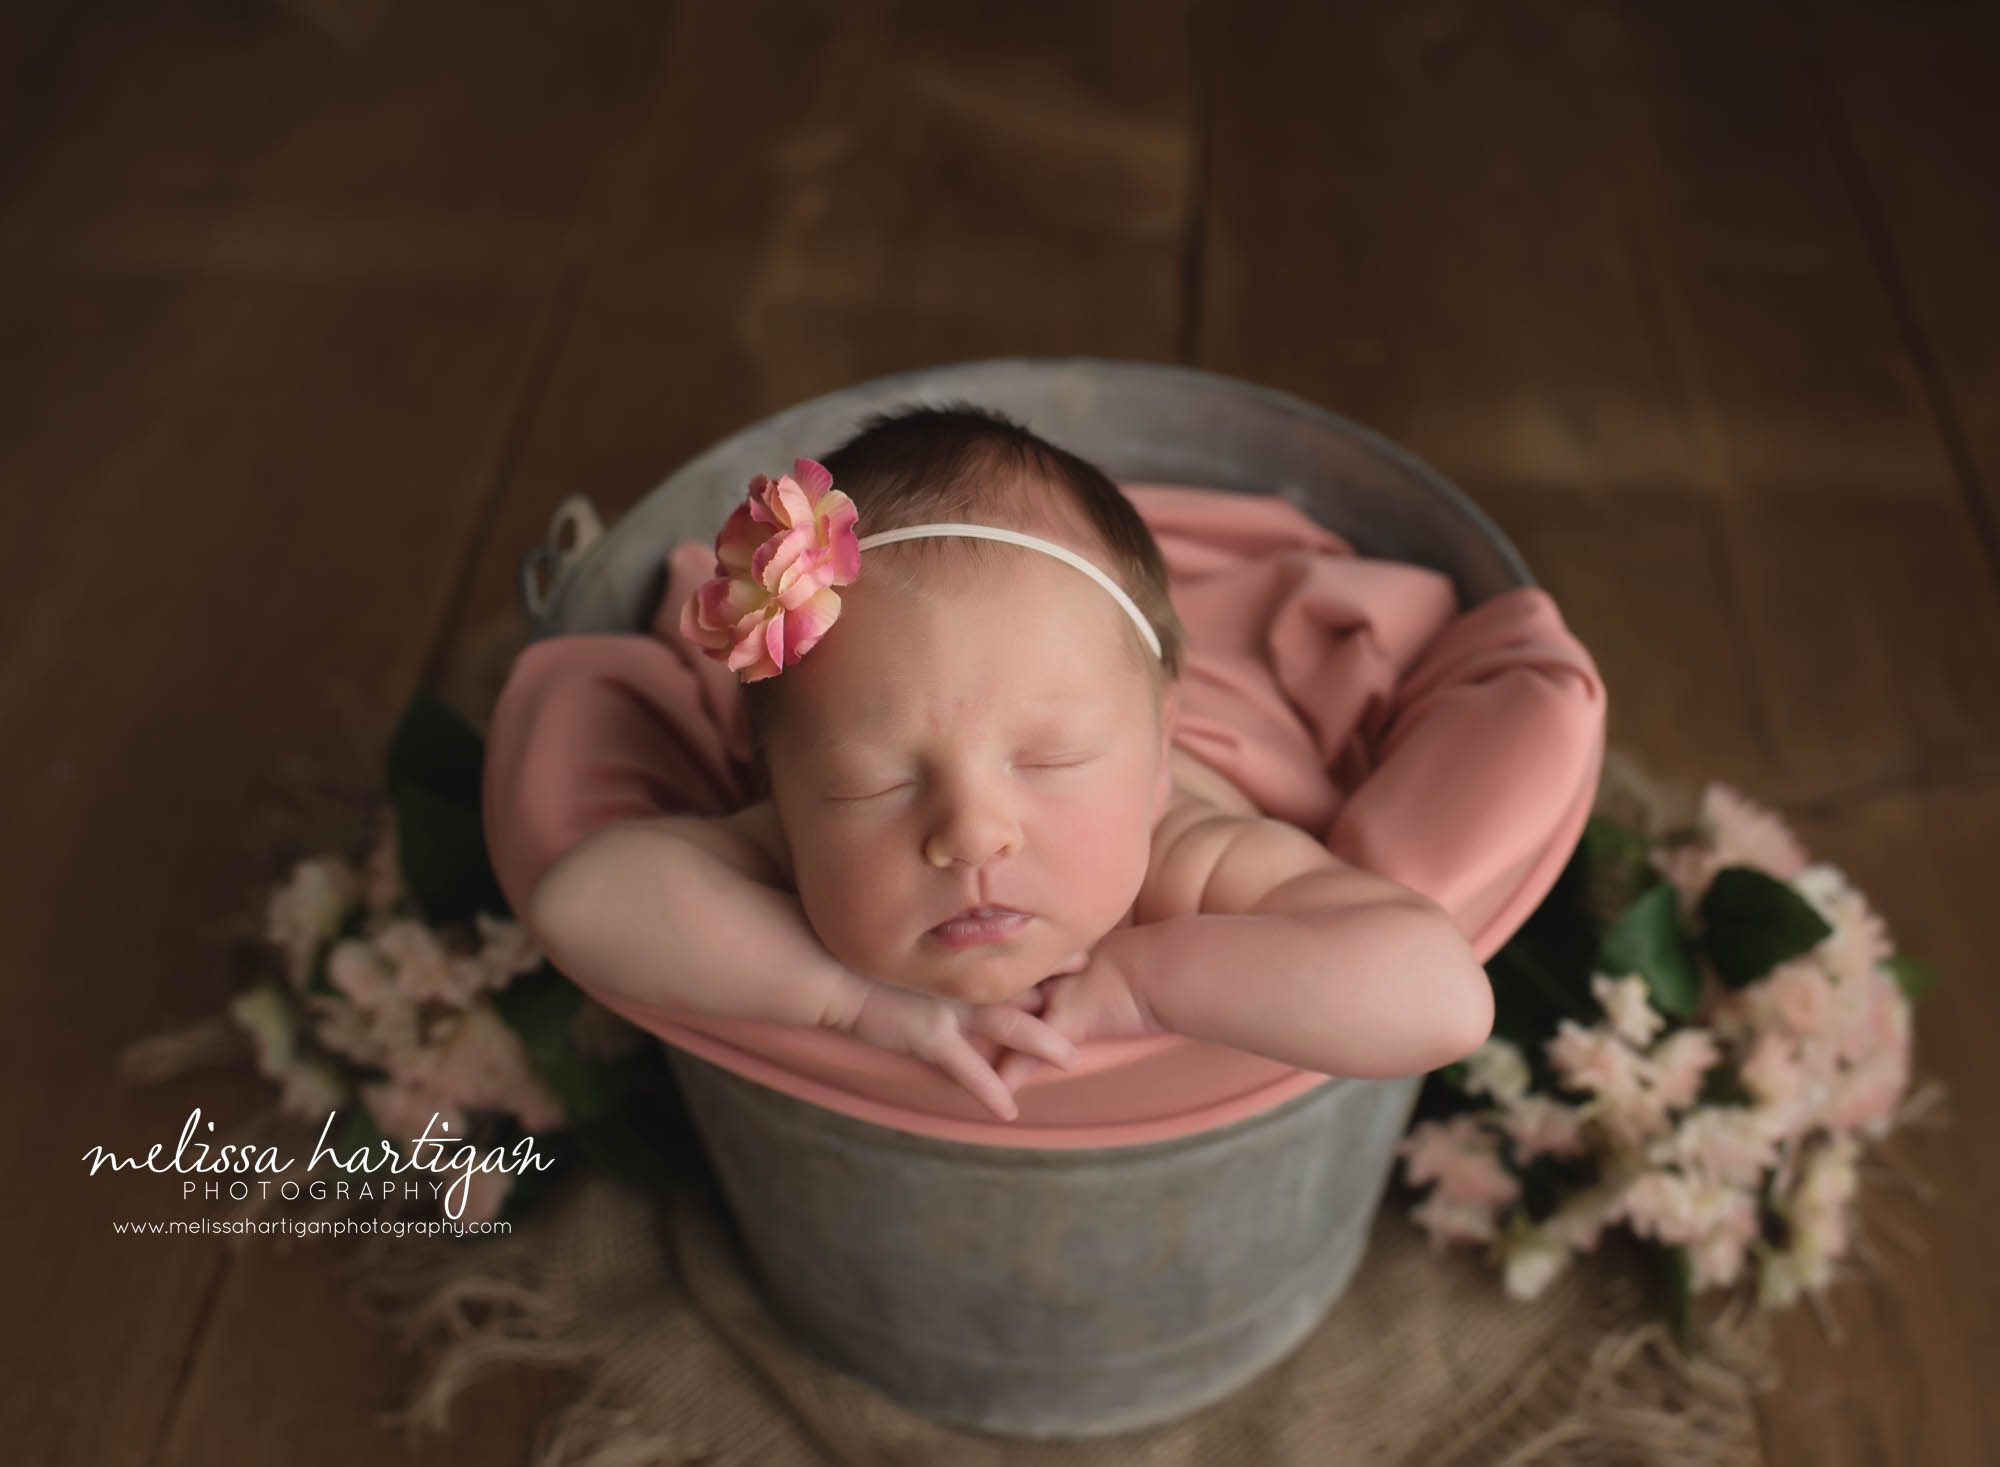 Nerwborn baby girl posed in metal tub with head on hands pose newborn photography CT